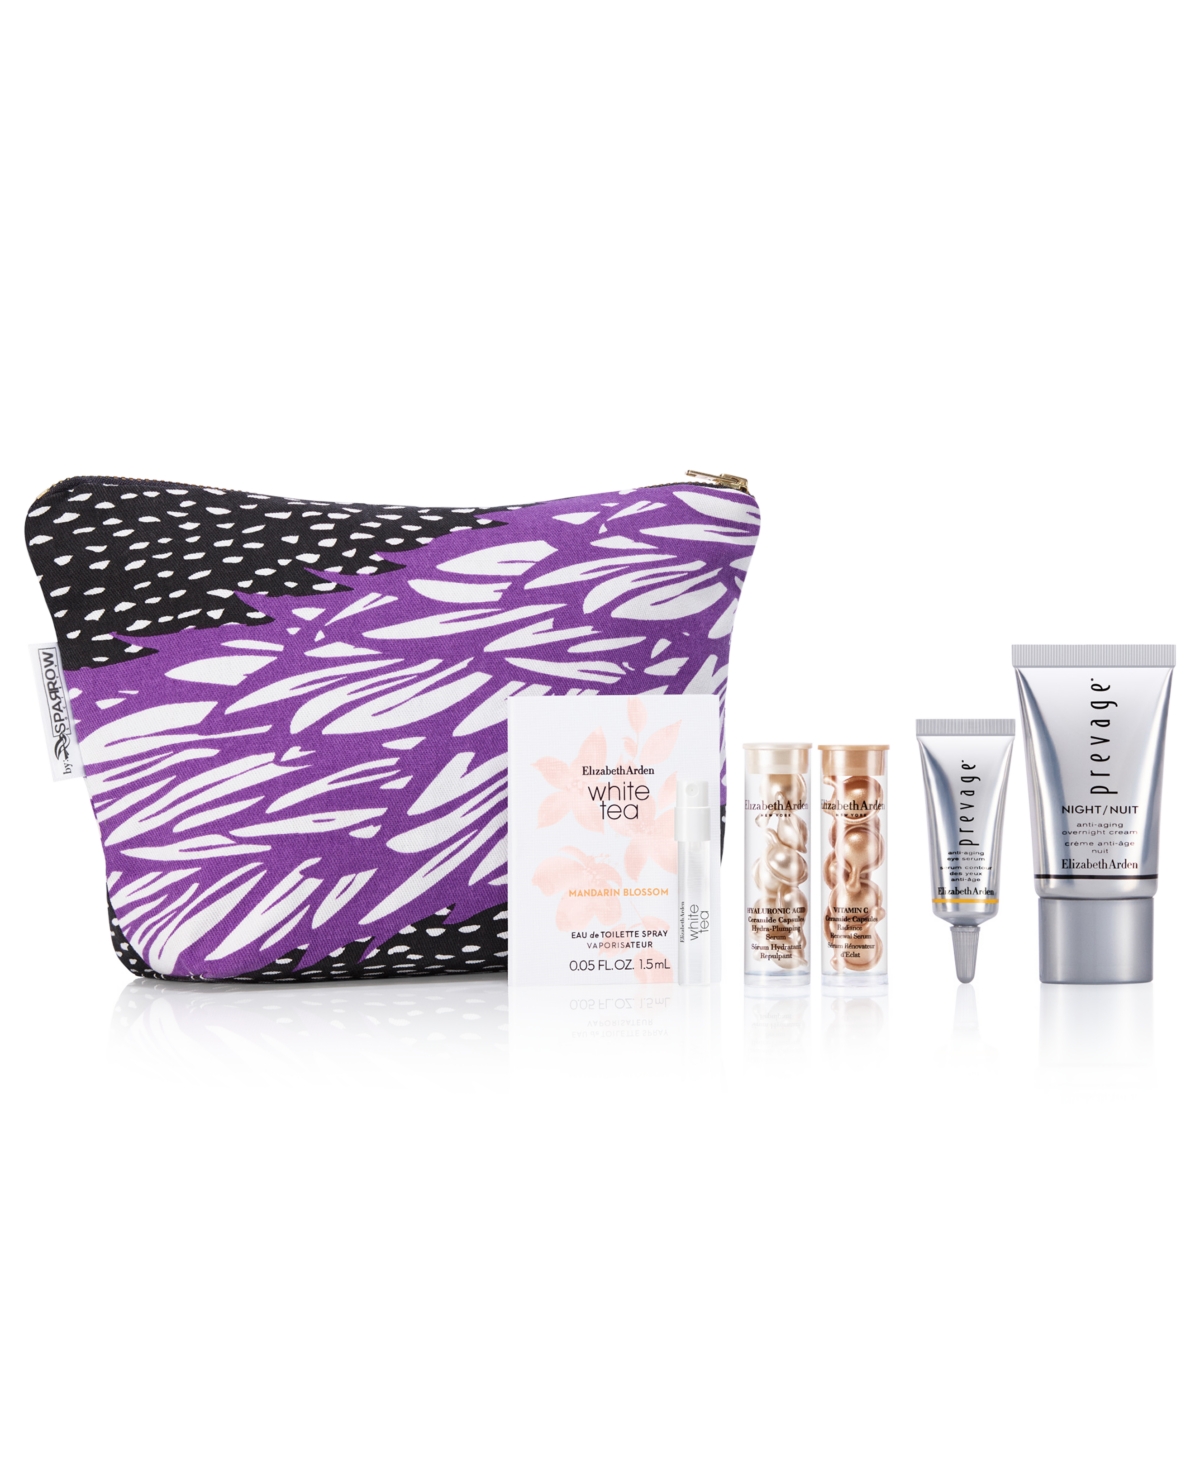 Elizabeth Arden Choose Your Free 6pc Gift with any $58 Elizabeth Arden purchase. Up to a $91 value!